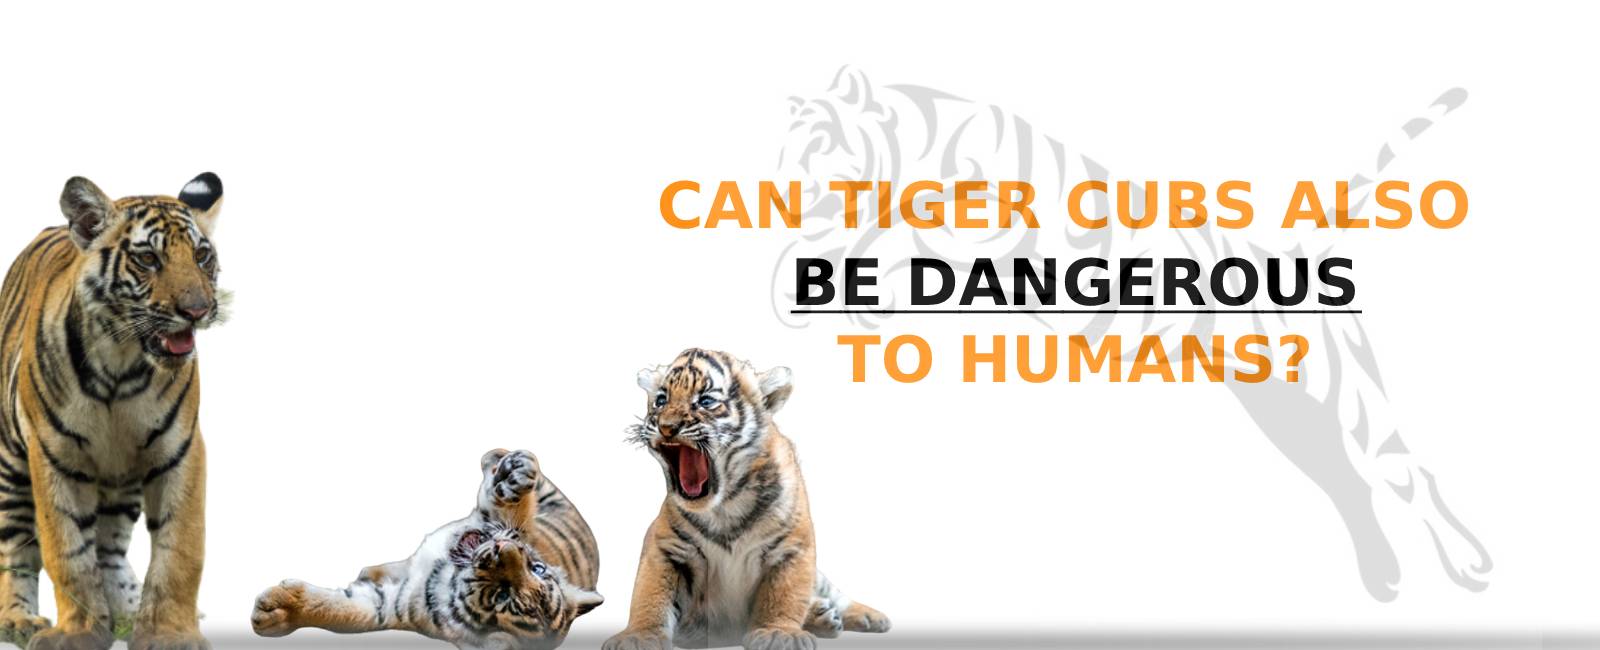 CAN TIGER CUBS ALSO BE DANGEROUS TO HUMANS?